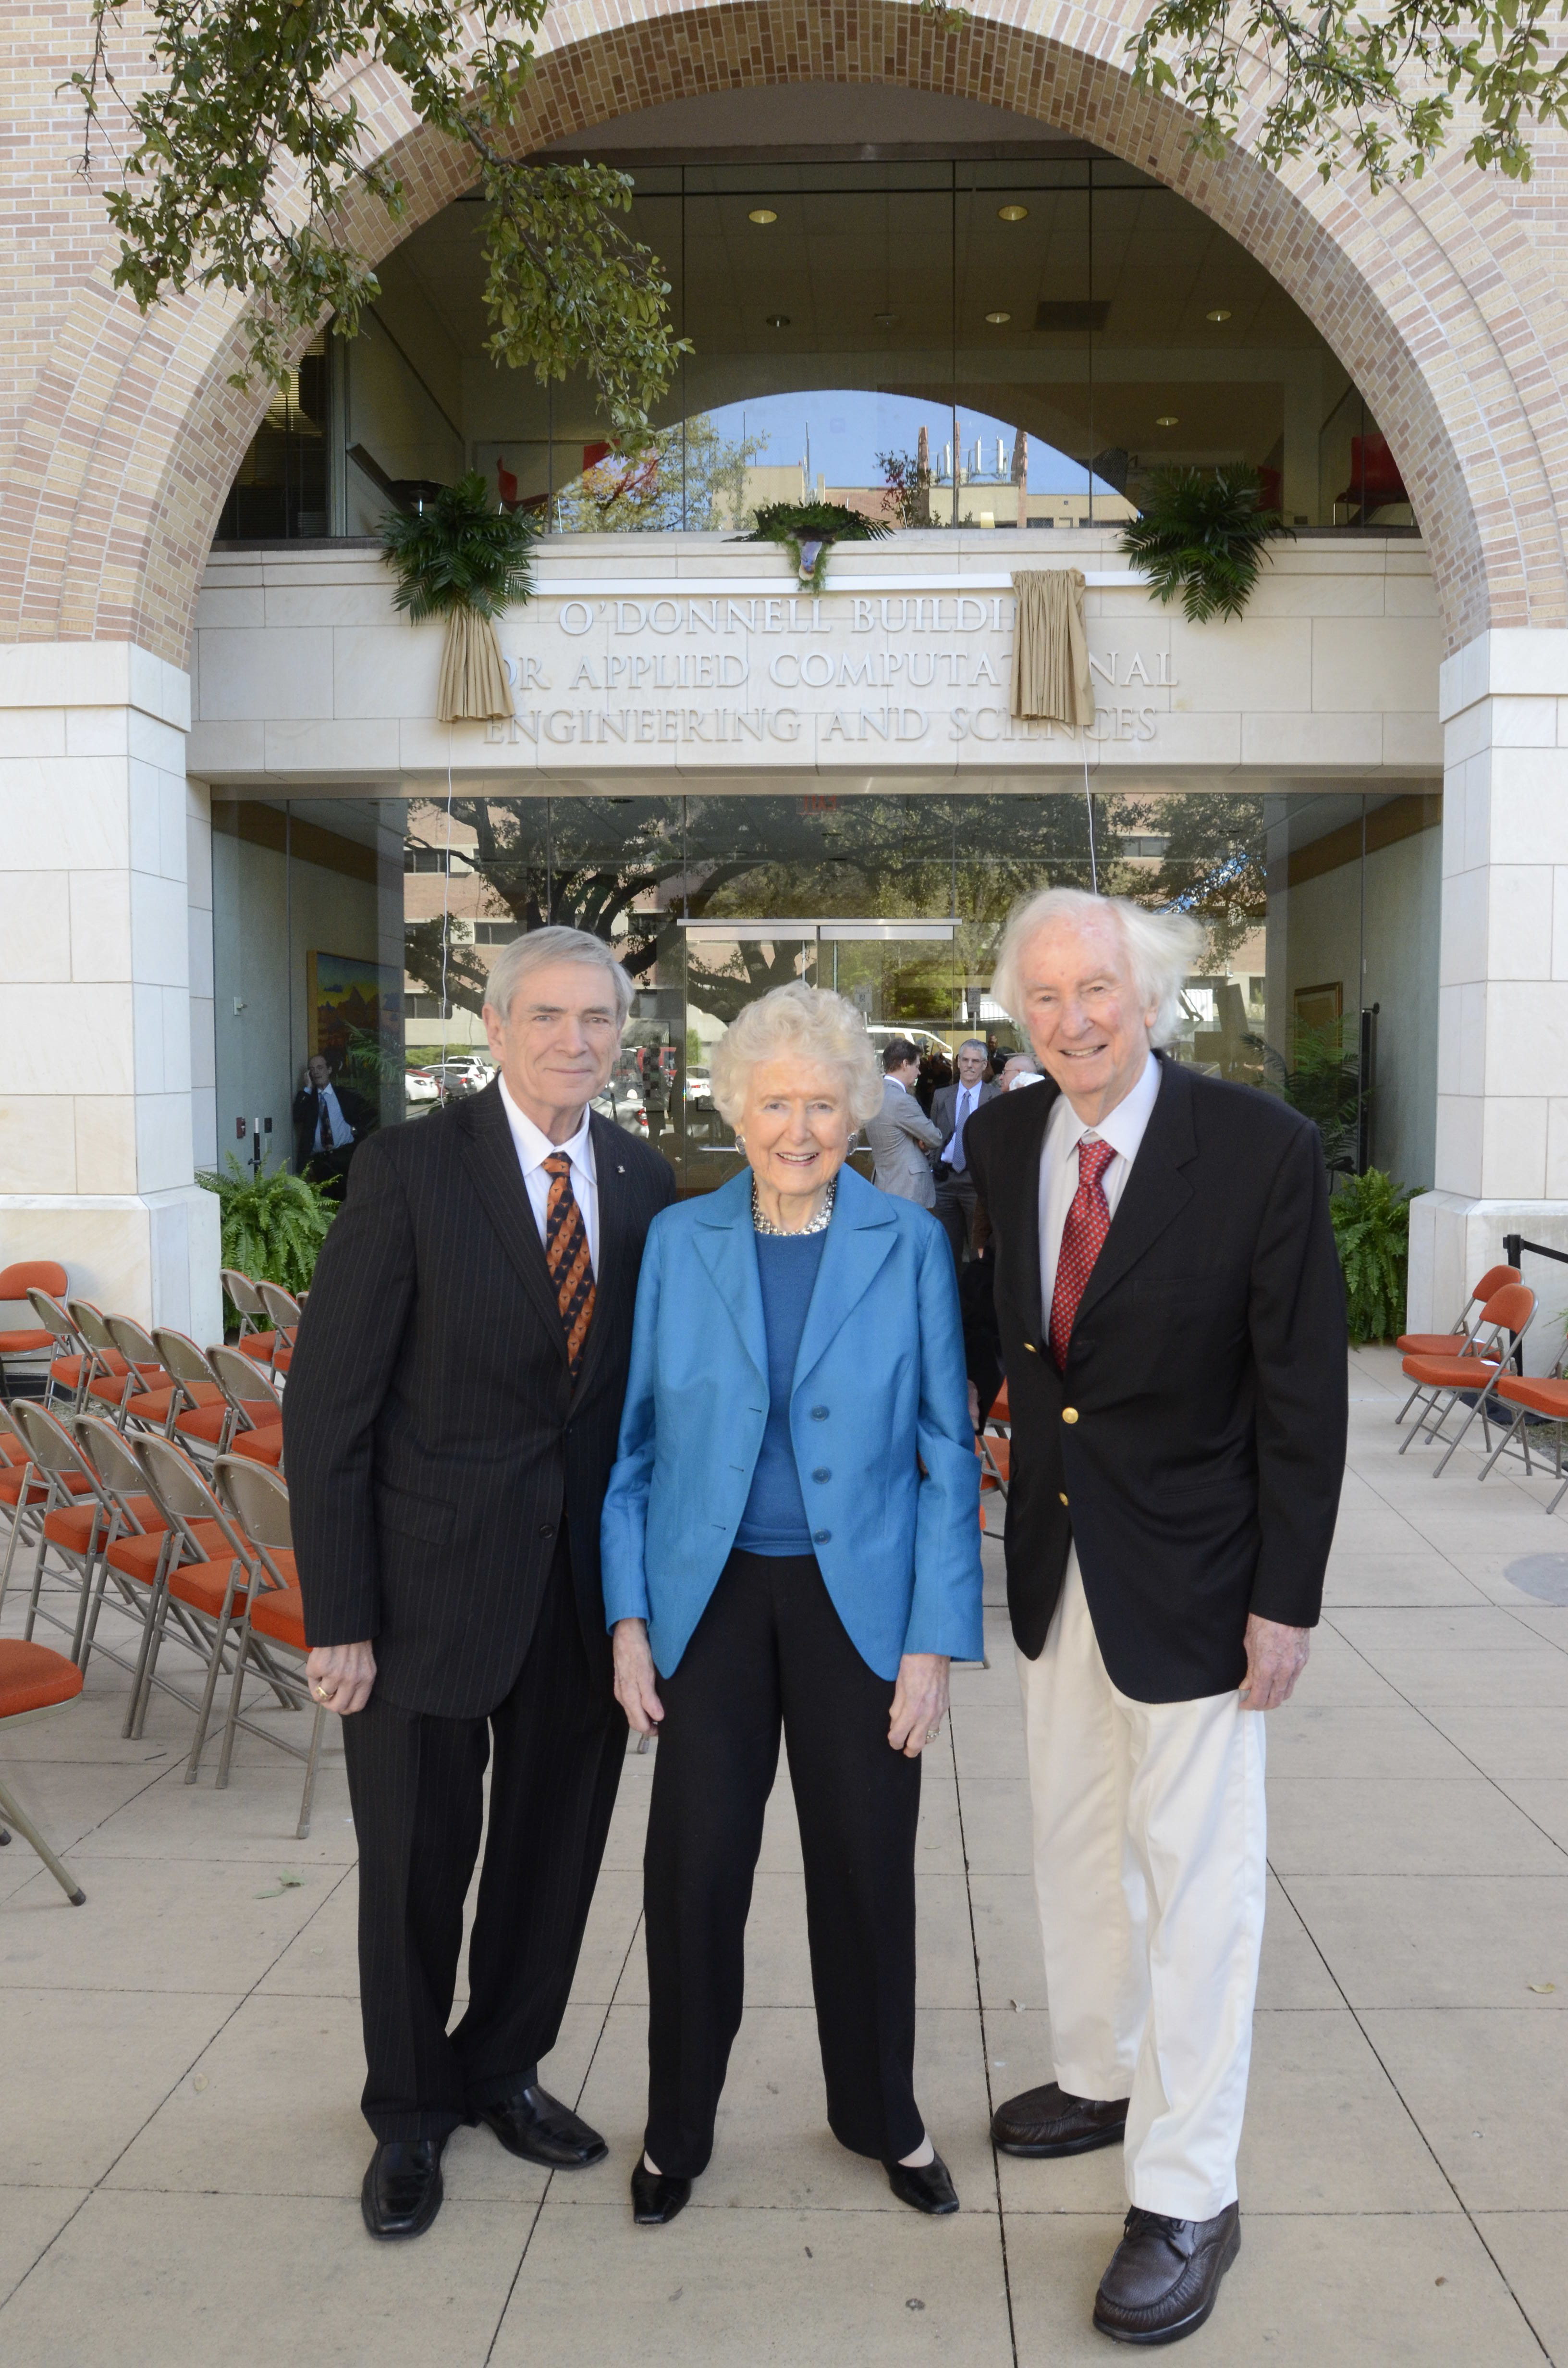 From Left to Right: J. Tinsley Oden, Edith and Peter J. O'Donnell, Jr outside the building that bears their name on campus at UT Austin.